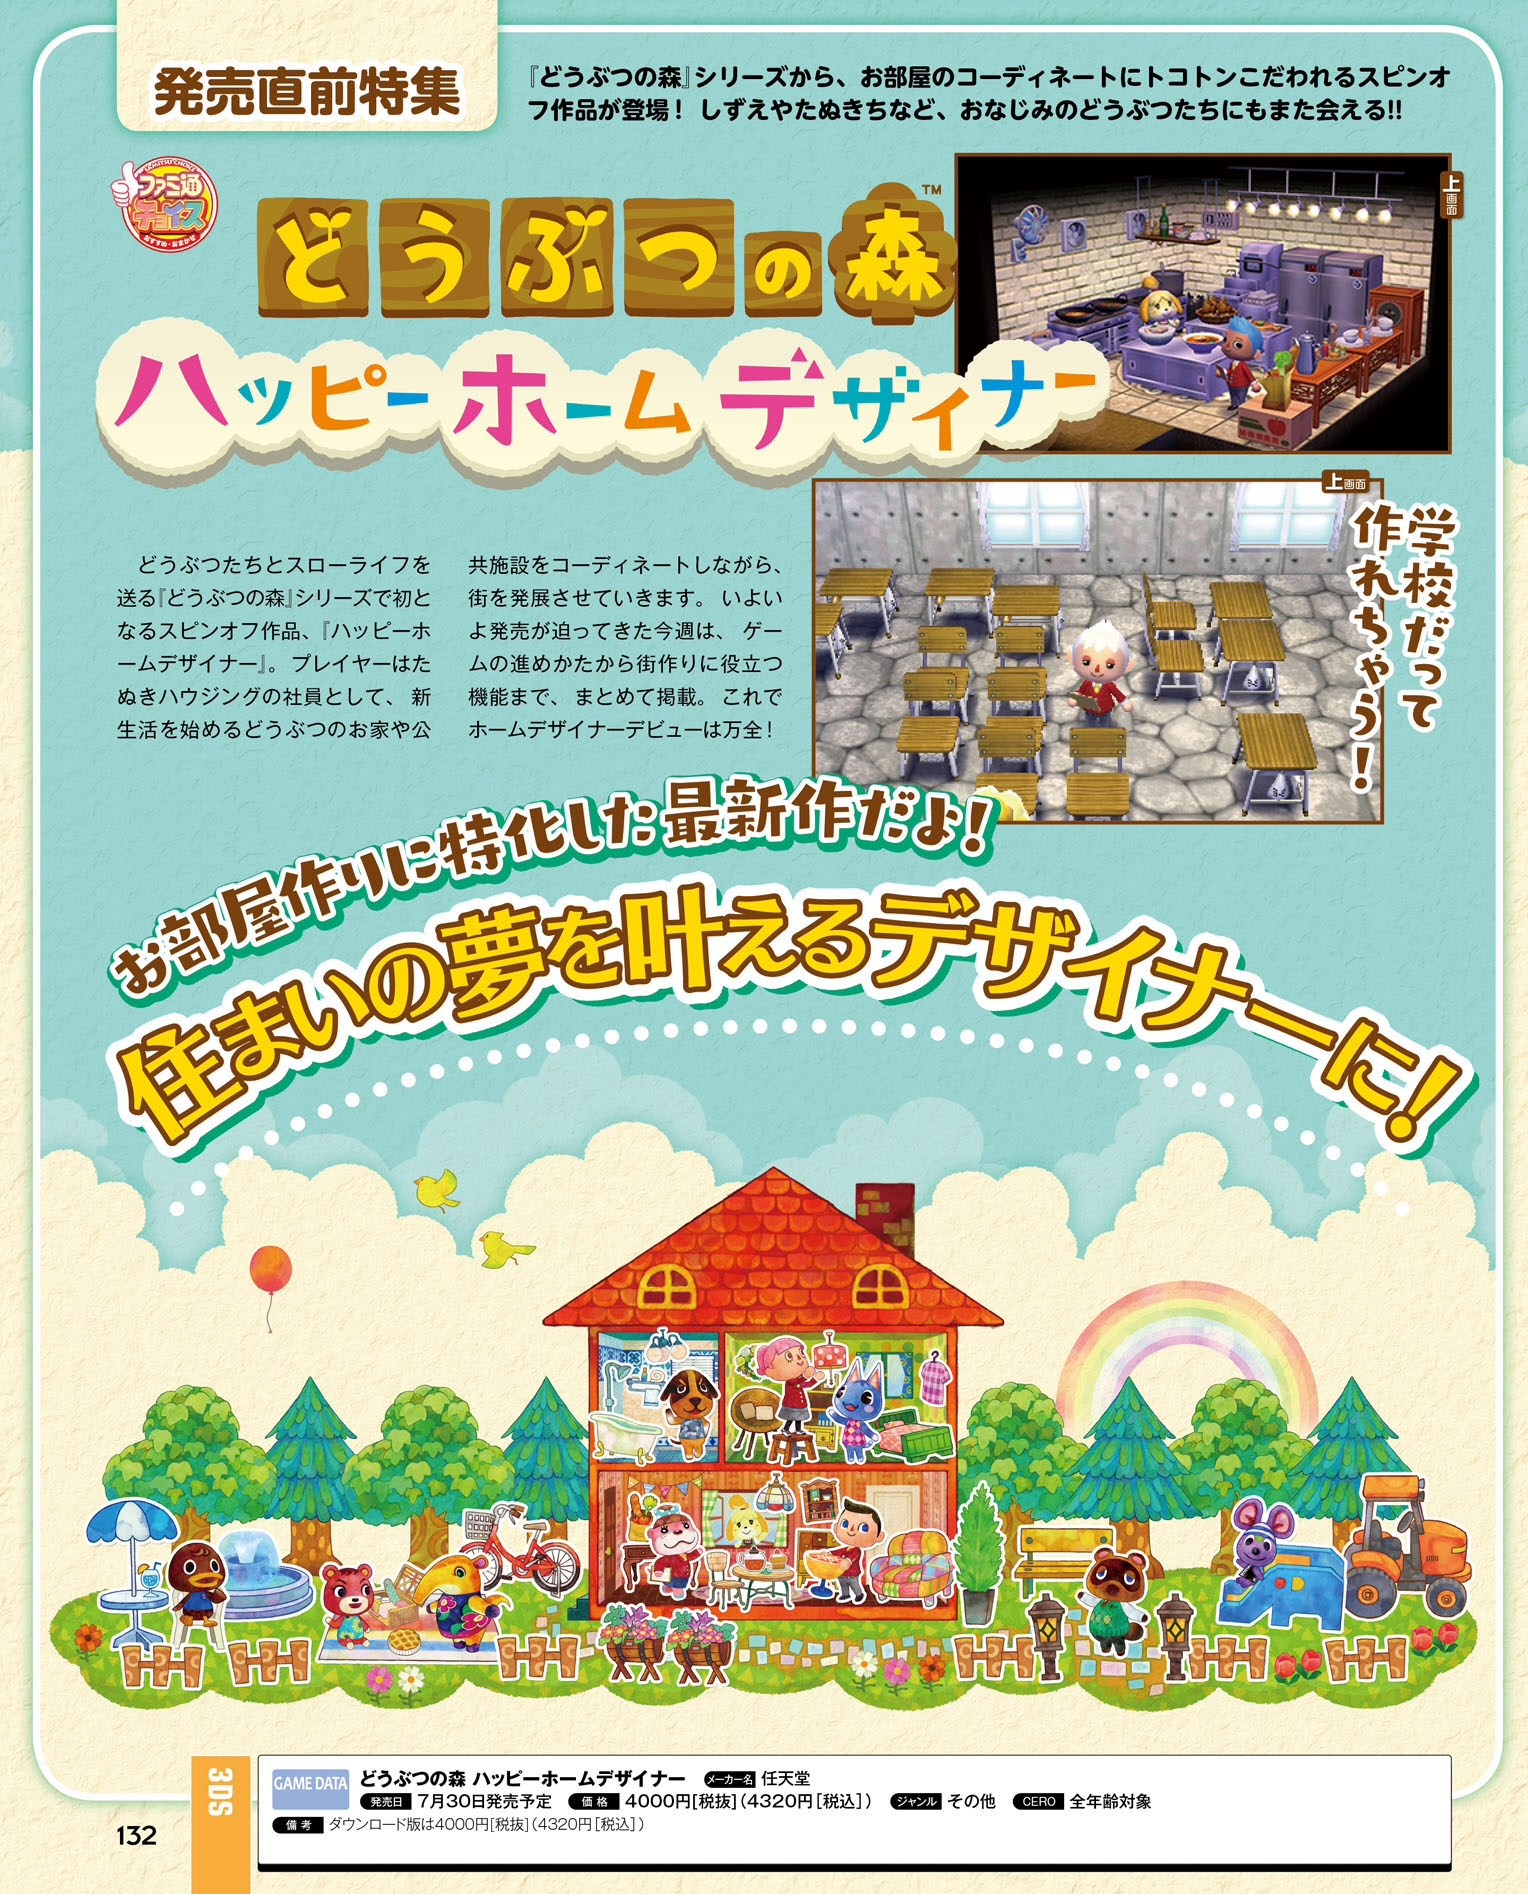 More Famitsu Scans And 3ds Summer Catalog Photos For Animal Crossing Happy Home Designer July 23rd Animal Crossing World